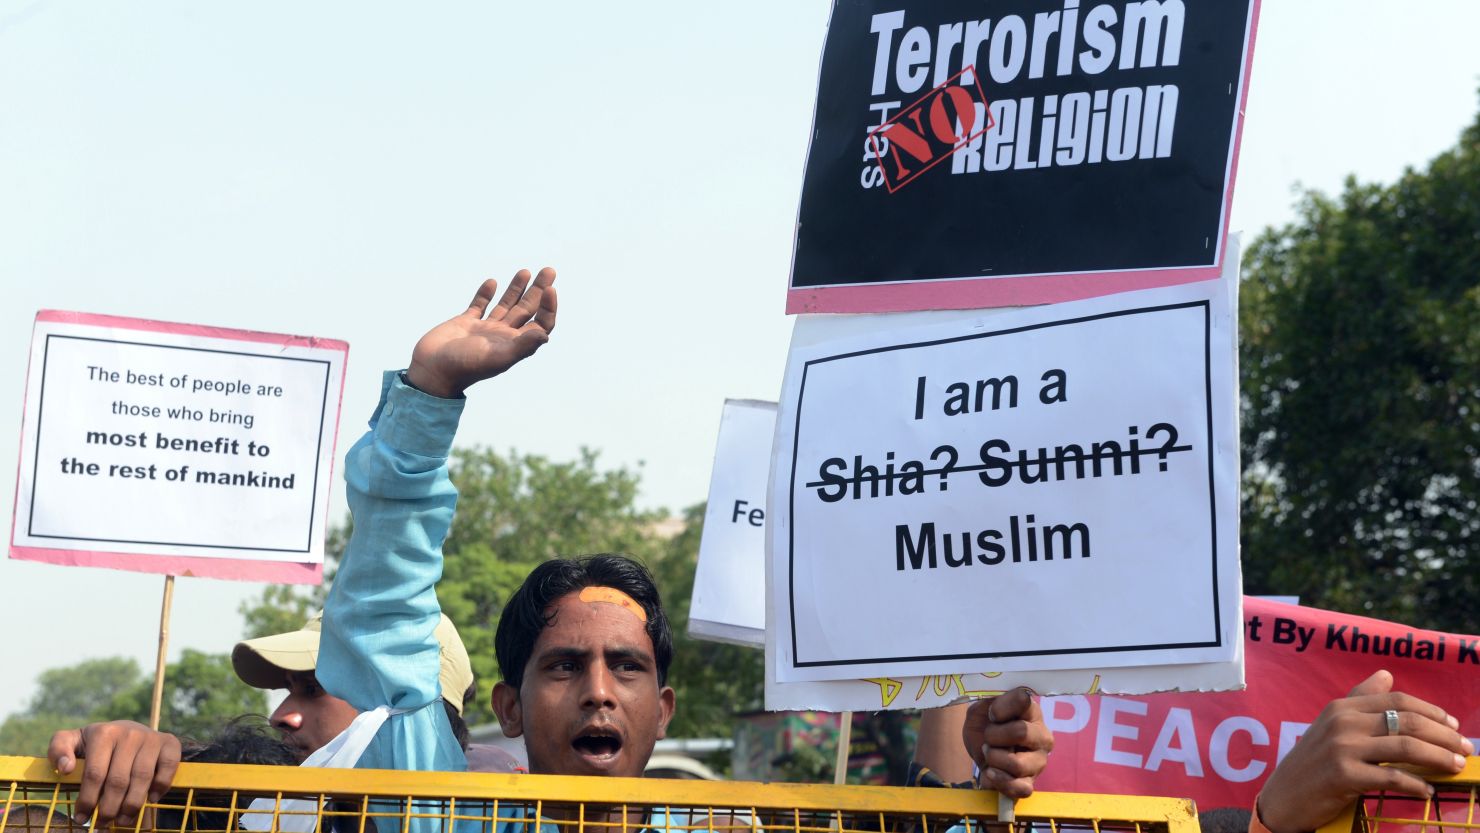 A protest in New Delhi, India, calling for unity among Muslims following violence in Iraq. June 27.